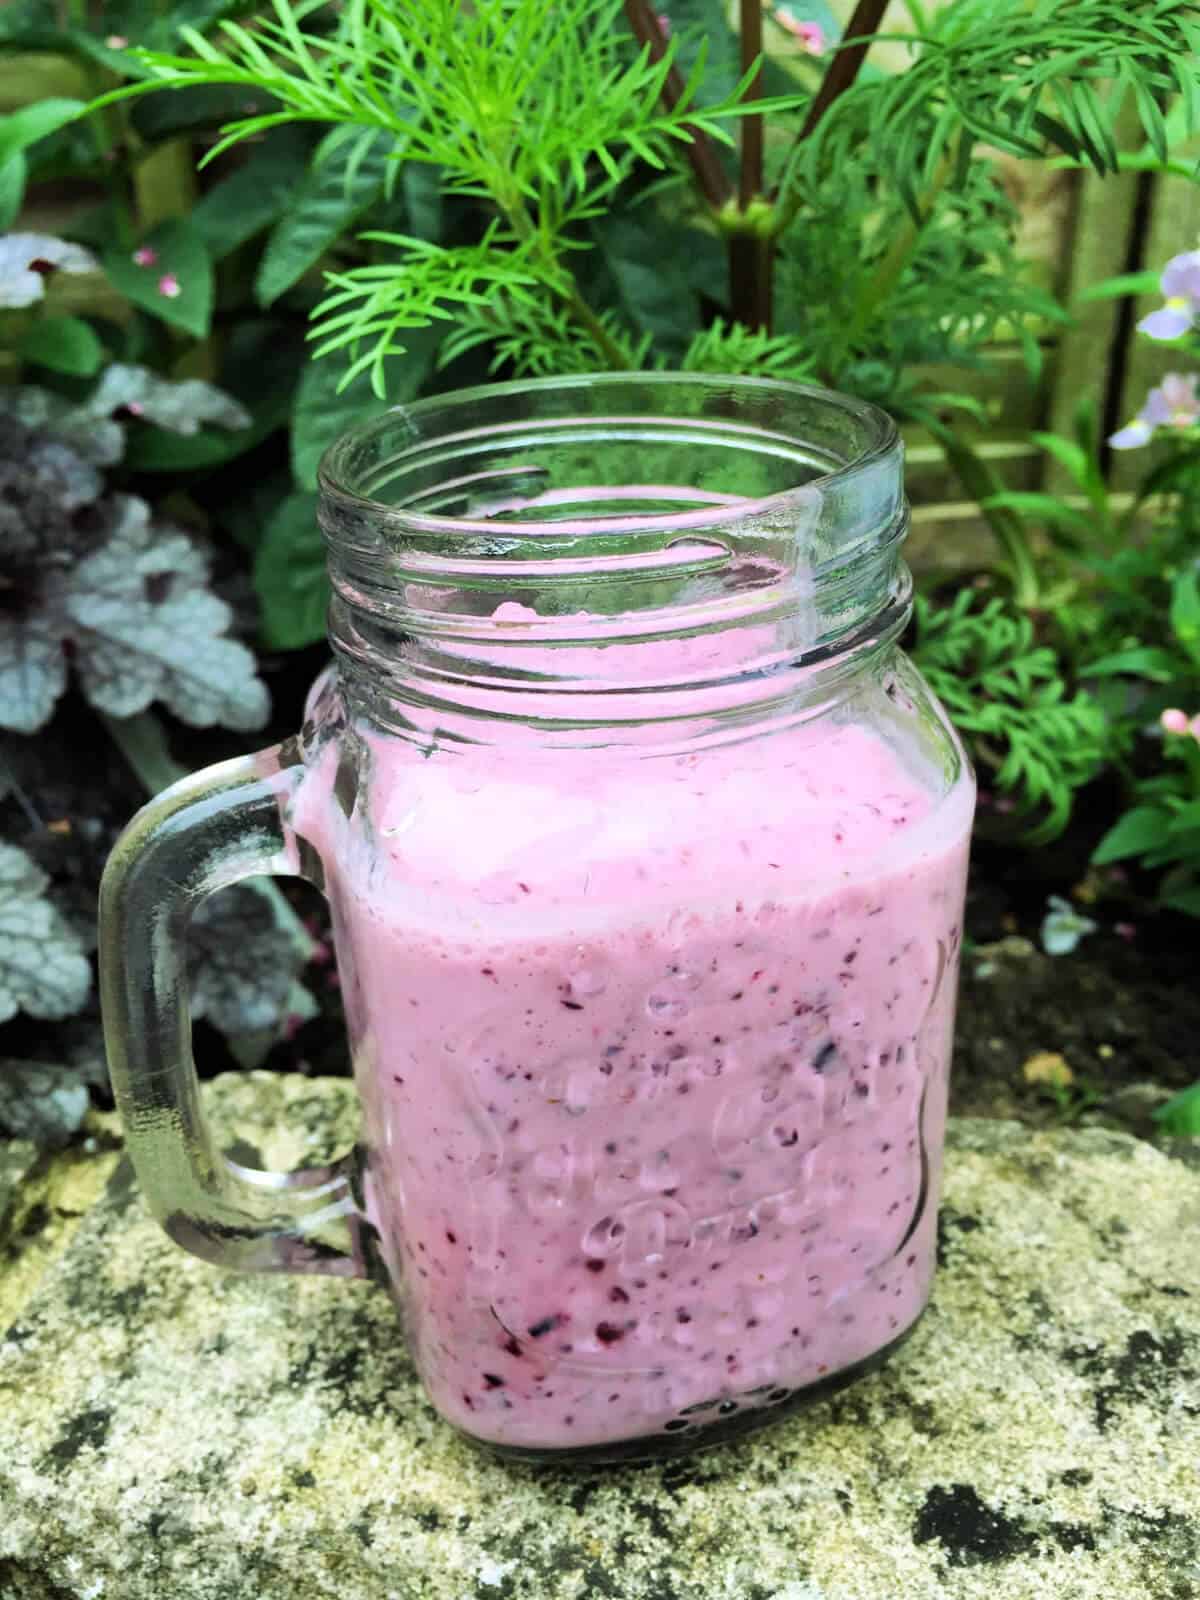 Smoothie in a jar with foliage behind.